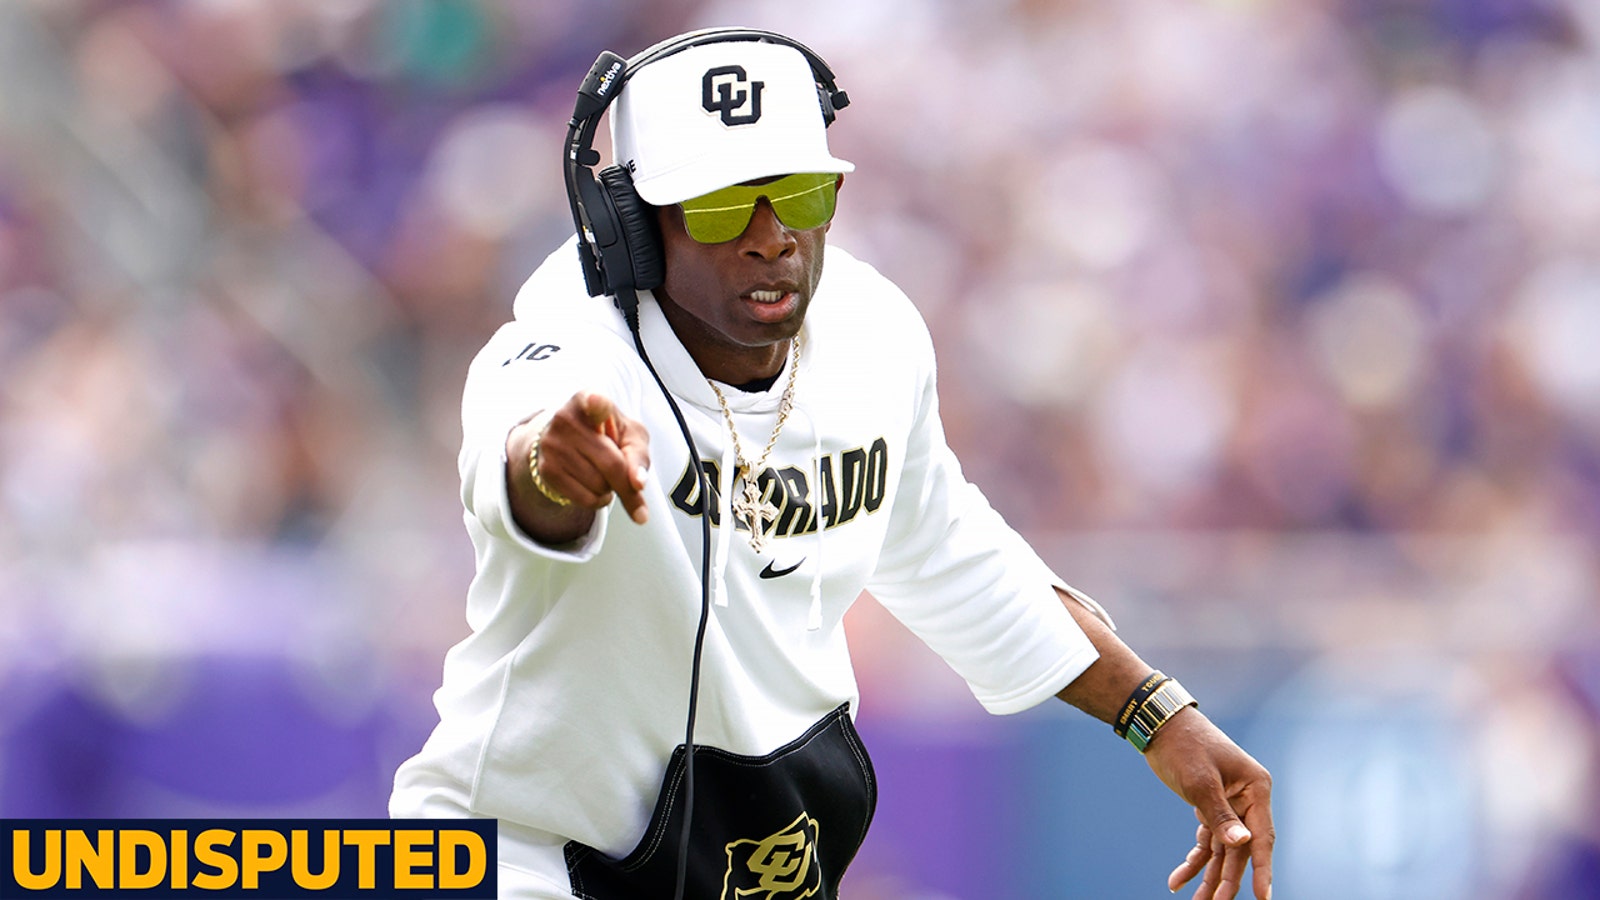 Deion Sanders on Colorado's win vs. TCU: 'It was a phenomenal moment I'll never forget'